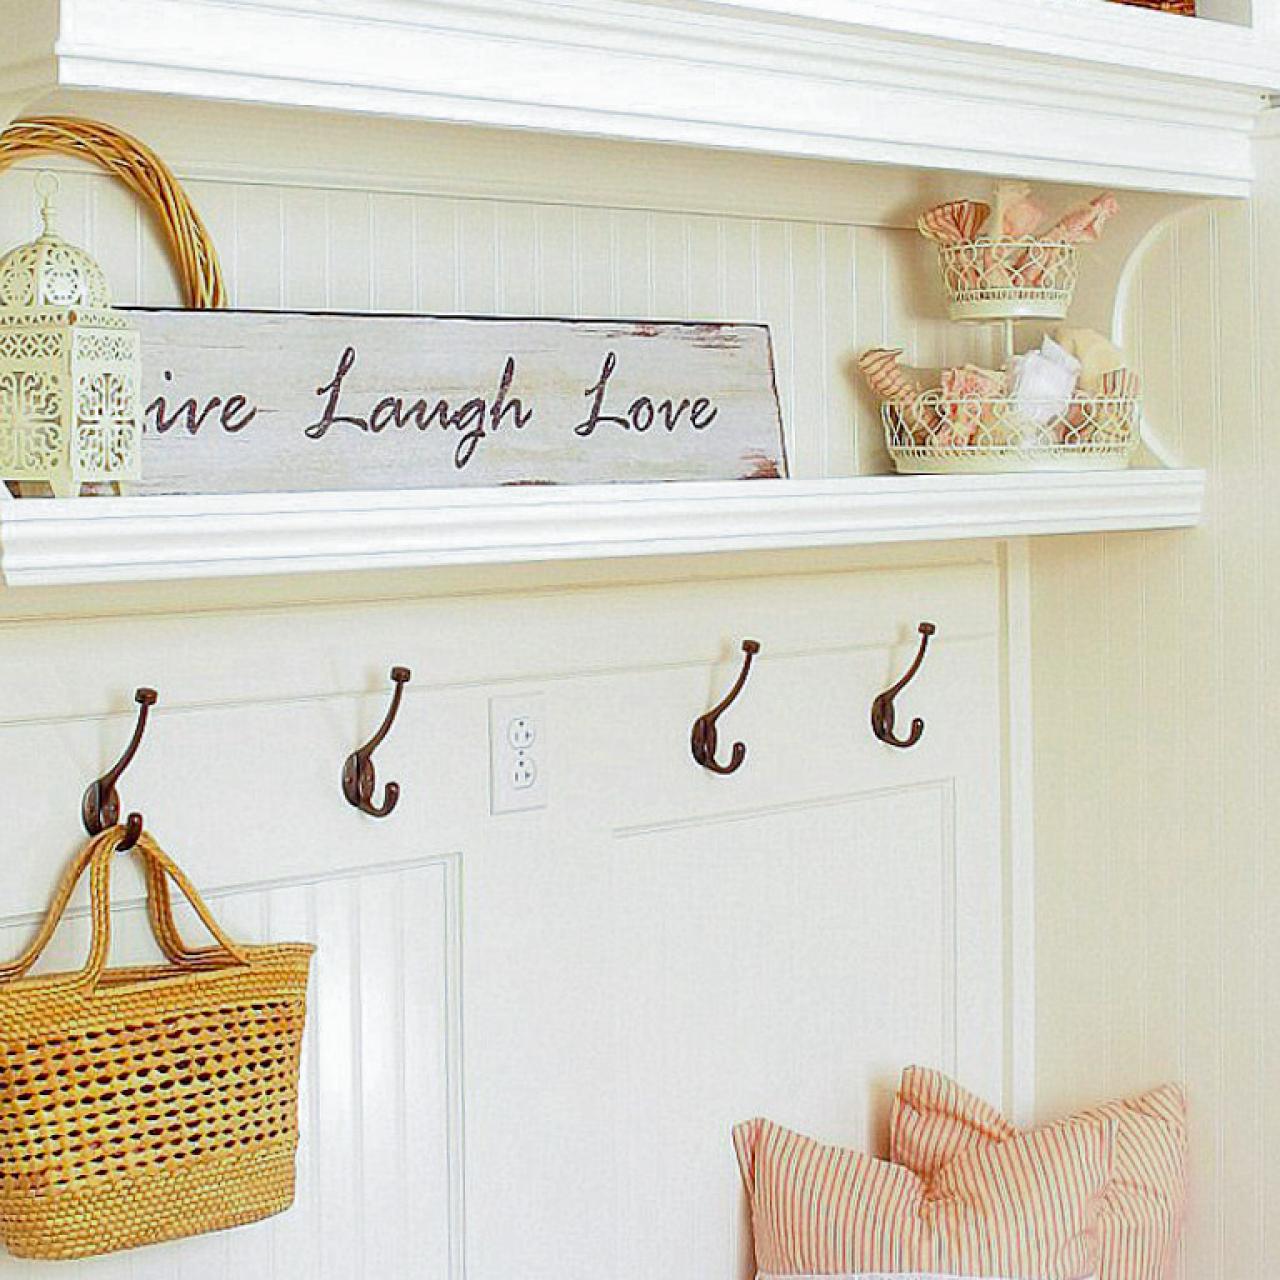 How to decorate your wall with straw hats, bags and baskets? - My